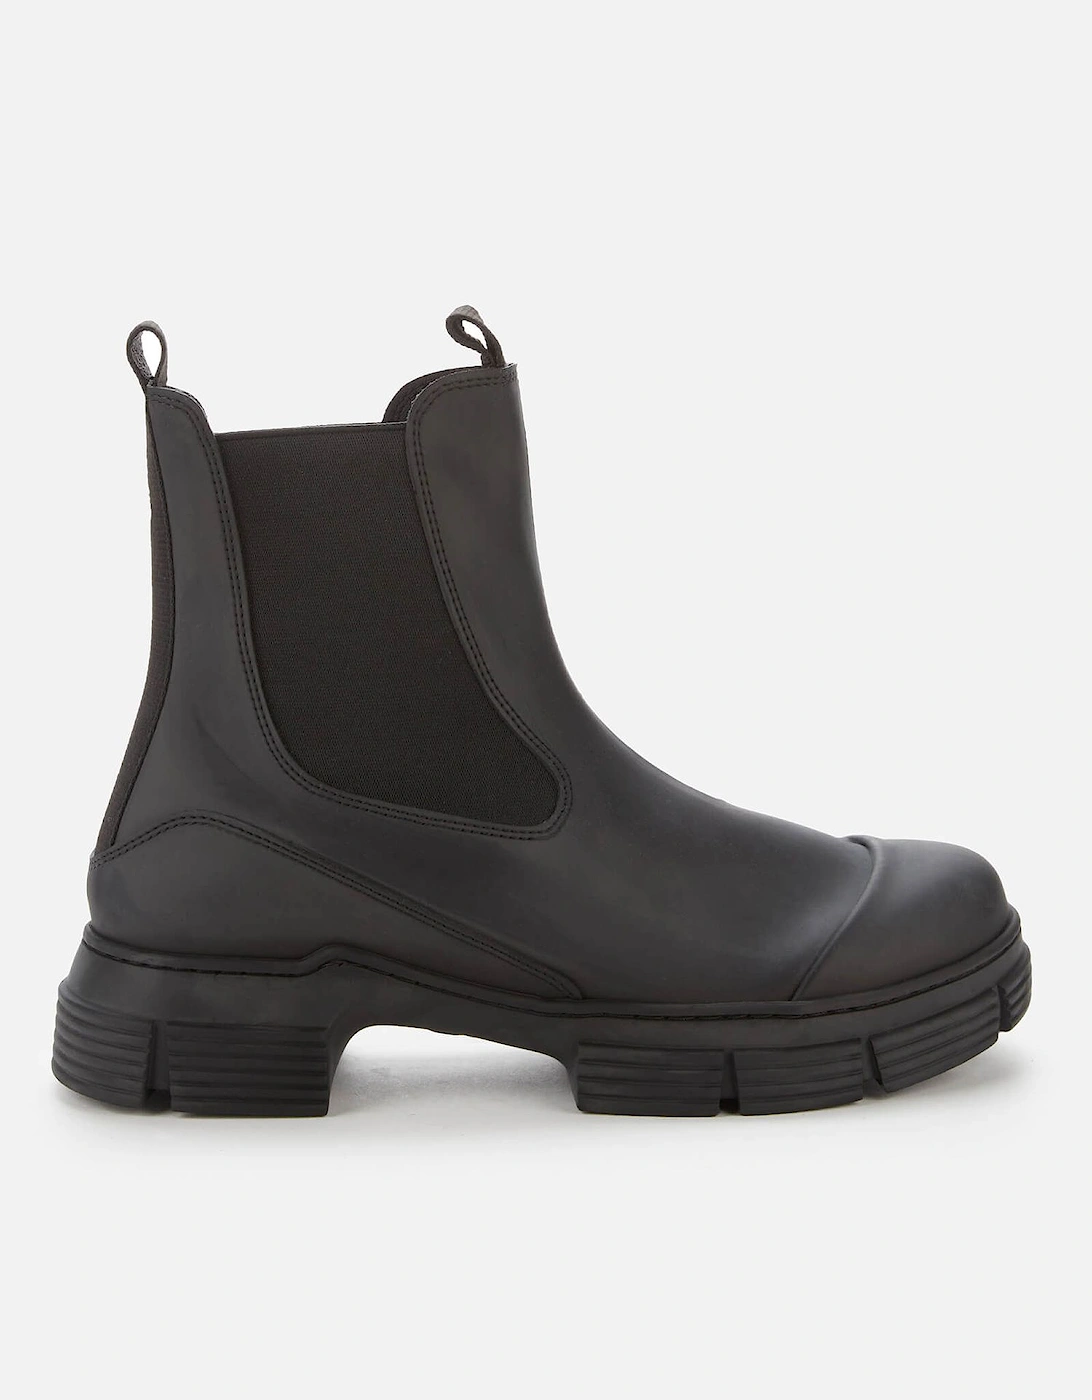 Women's Recycled Rubber Boots - Black - - Home - Brands - - Women's Recycled Rubber Boots - Black